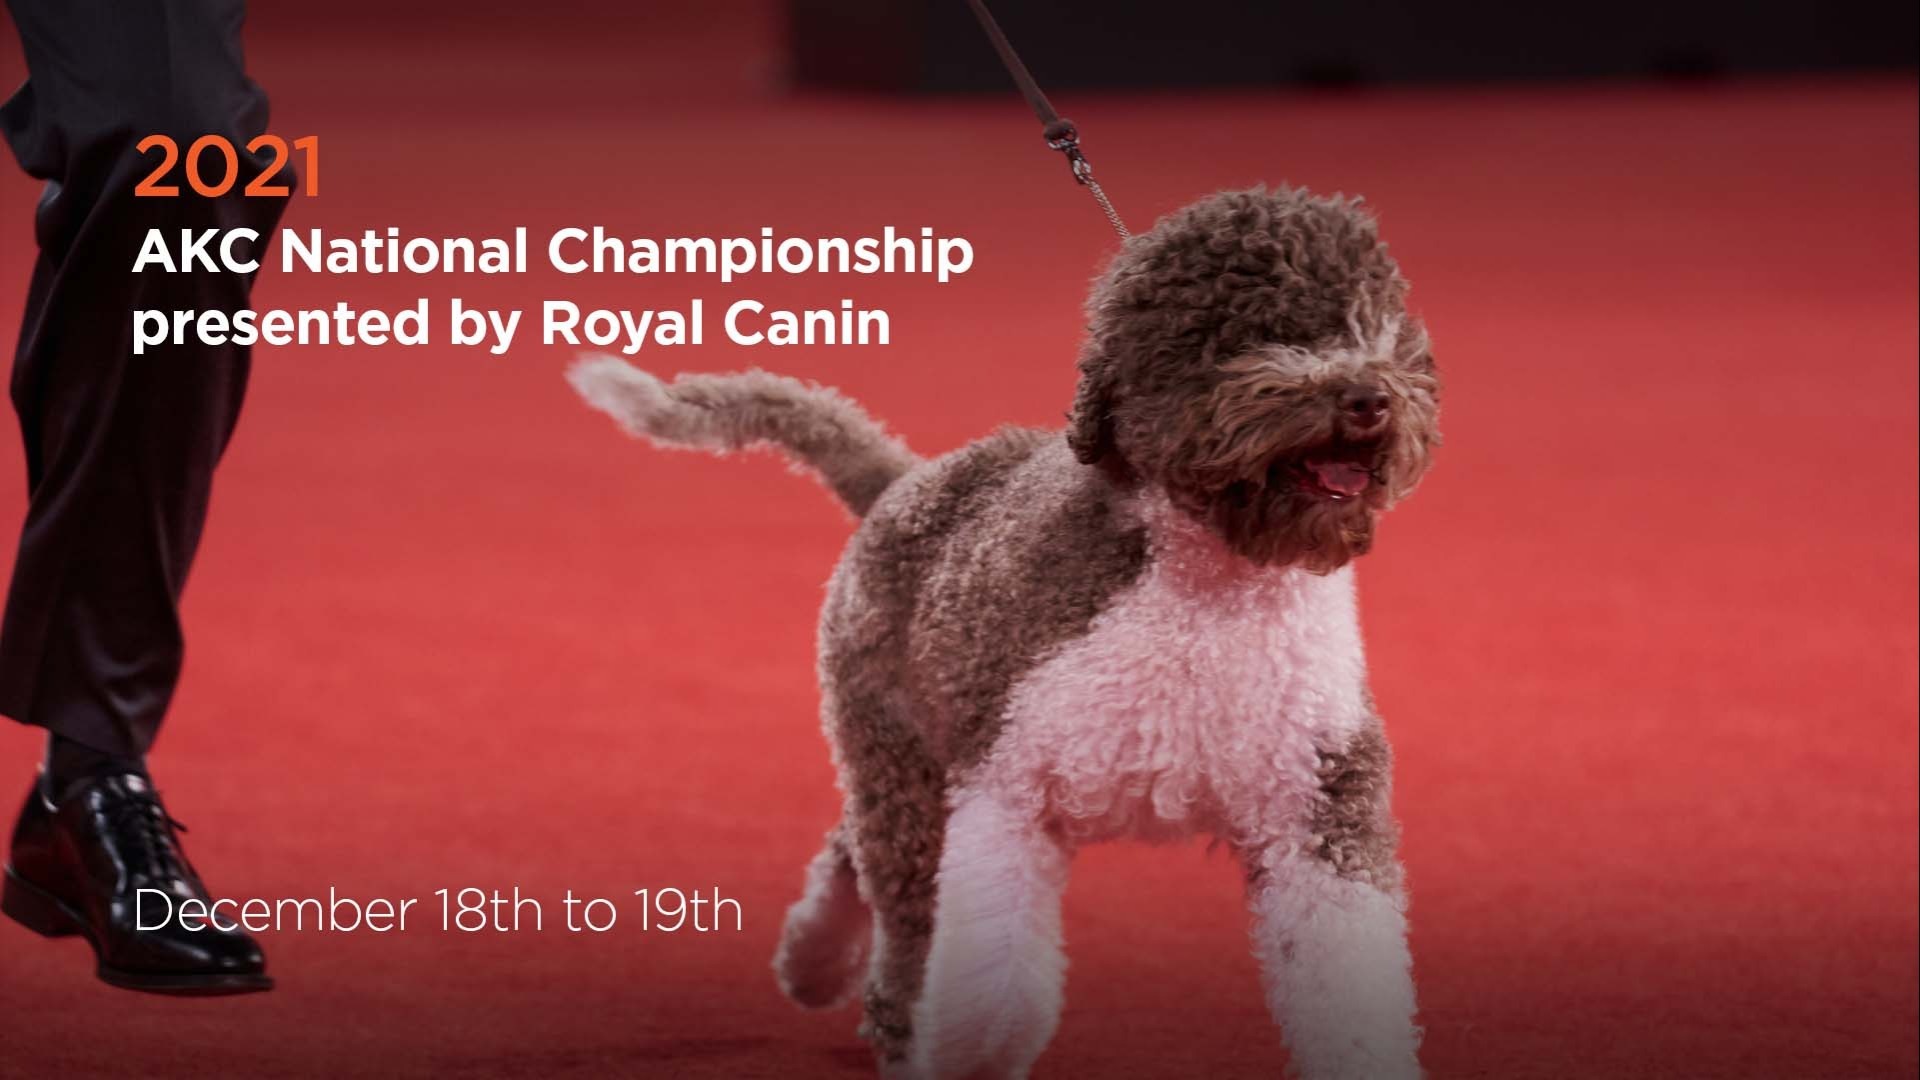 AKC.TV 2021 AKC National Championship presented by Royal Canin